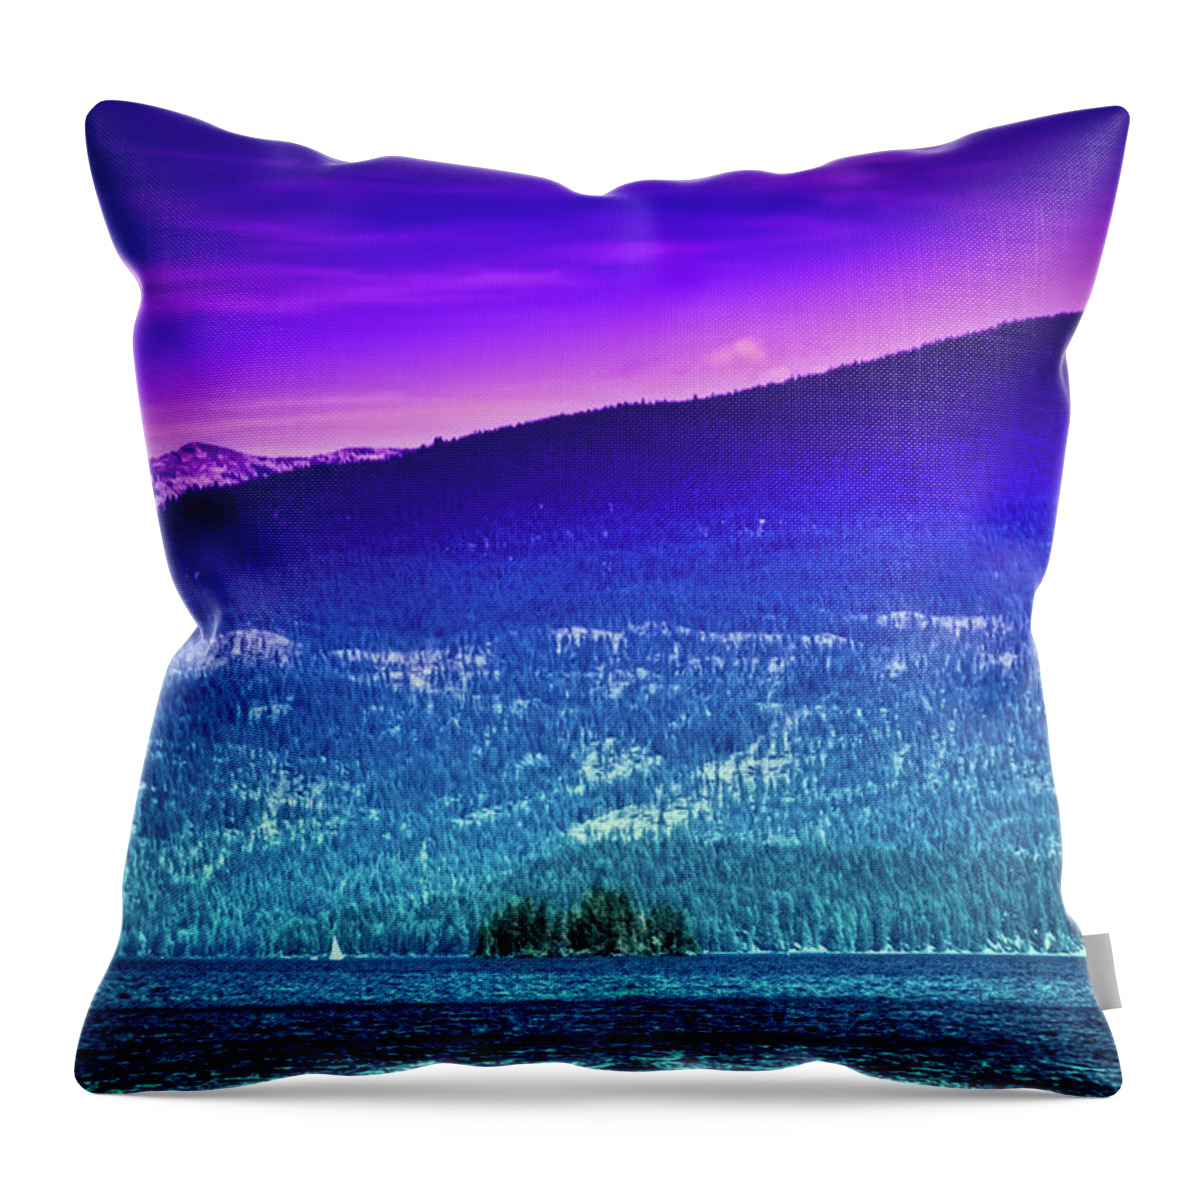 View Of Papoose From Luby Bay Throw Pillow featuring the photograph View of Papoose from Luby Bay by David Patterson